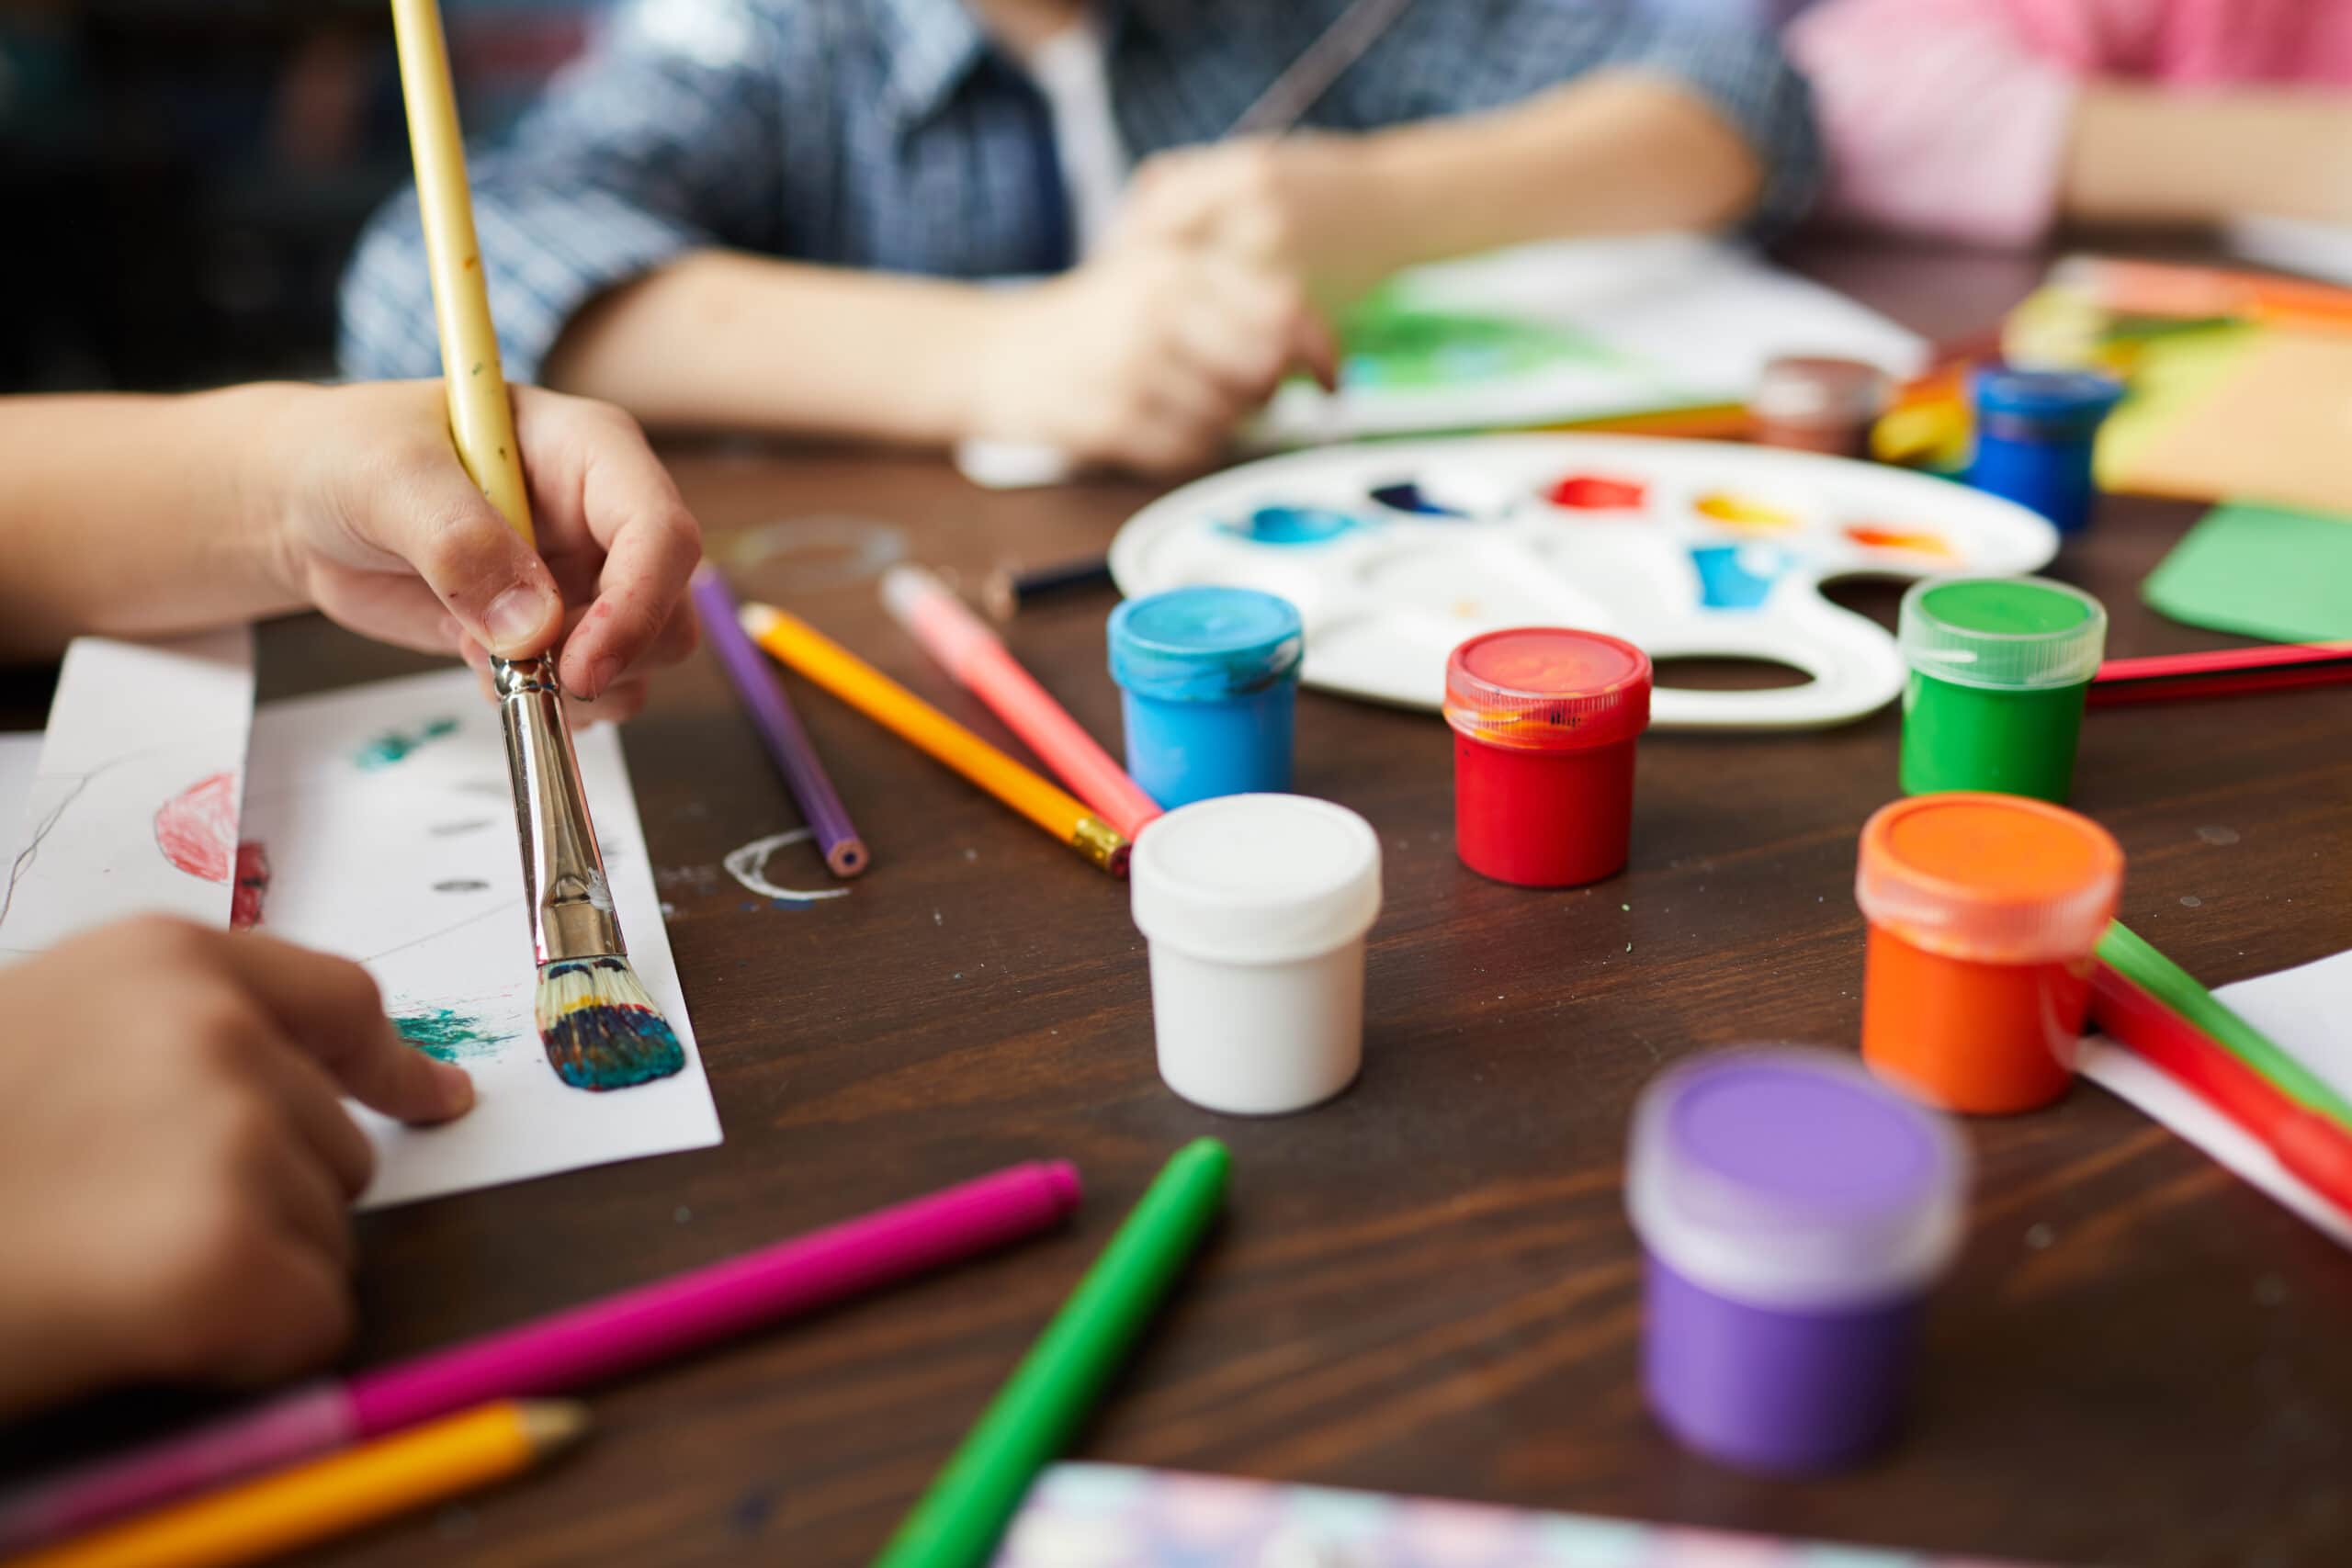 Close-up of children painting pictures, focus on art supplies paints, pencils and crayons.